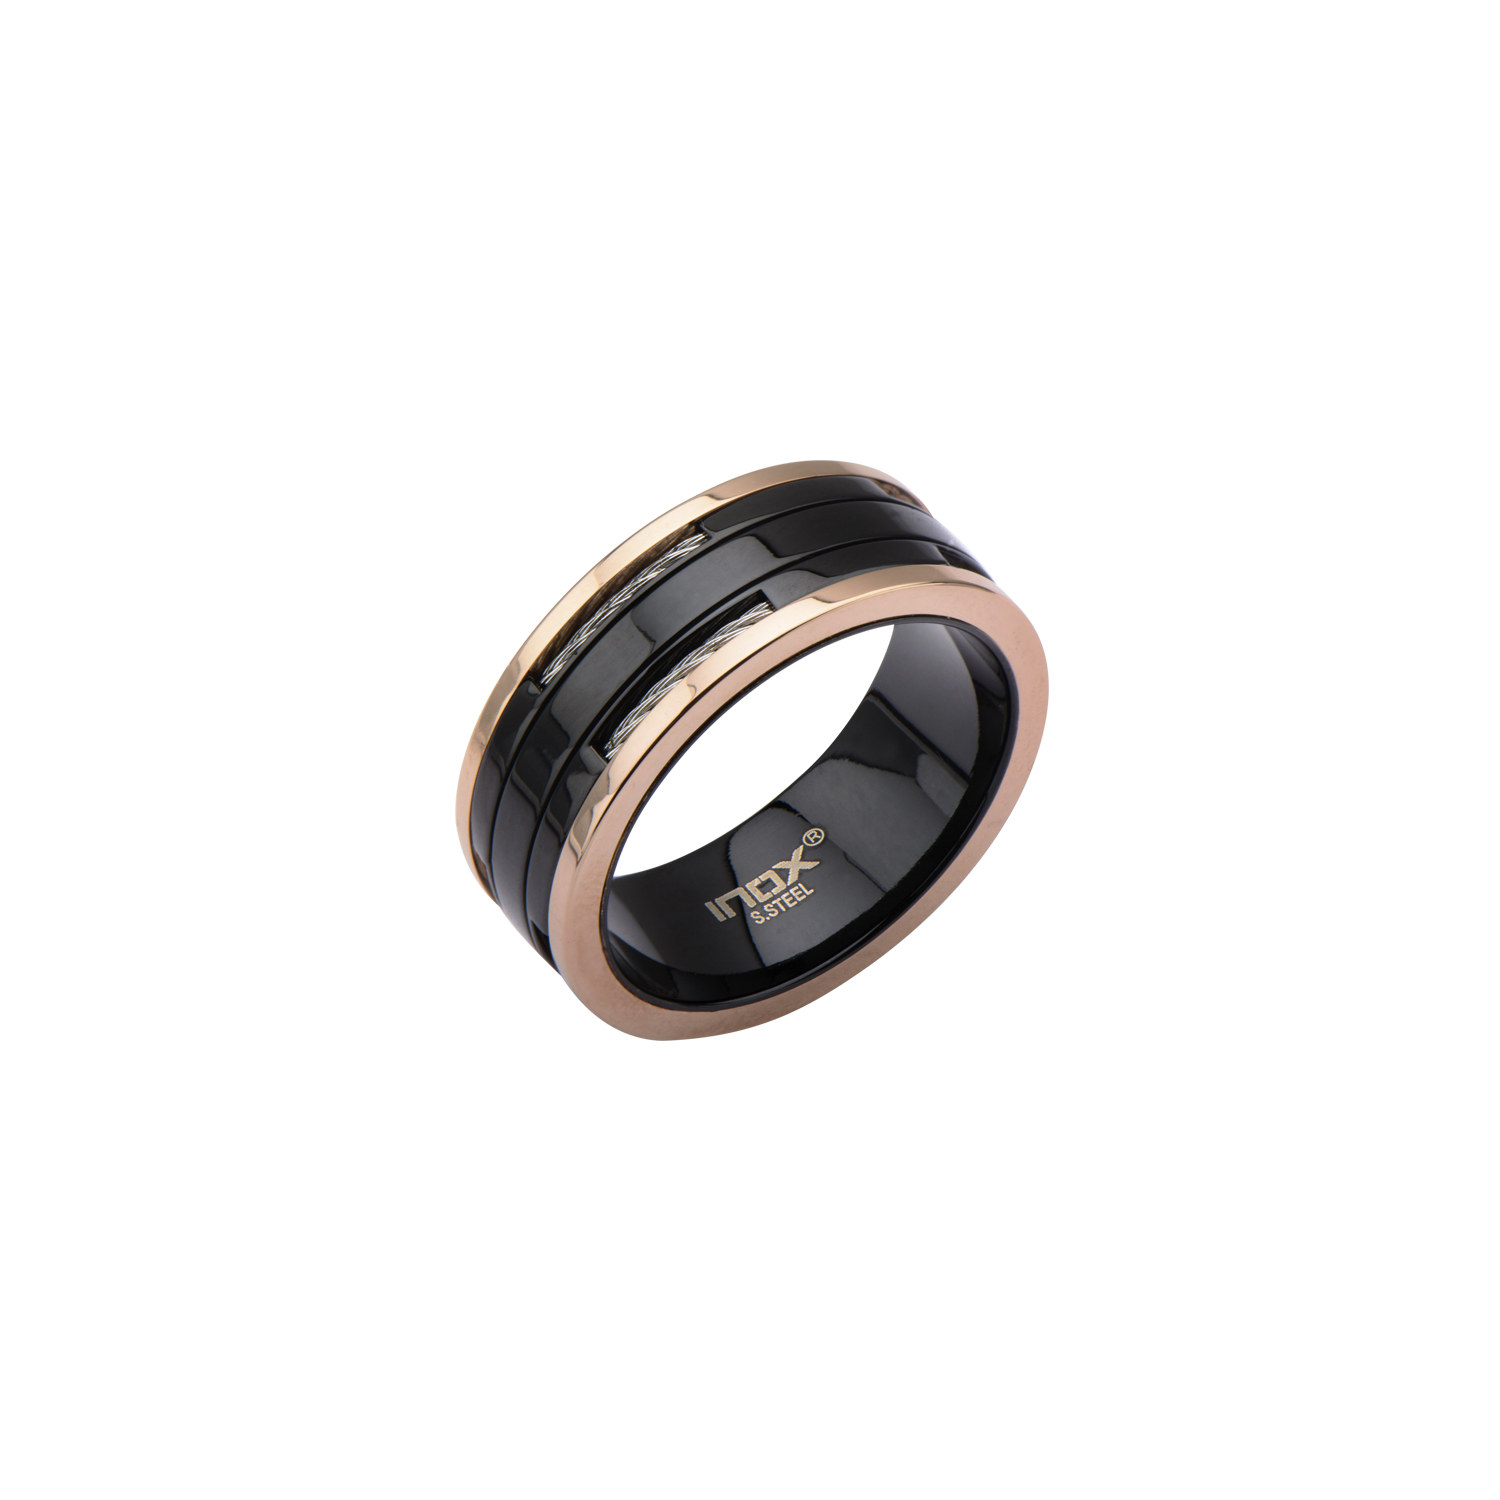 Black Plated and Rose Gold Plated Ring with Inlayed Cable Morin Jewelers Southbridge, MA